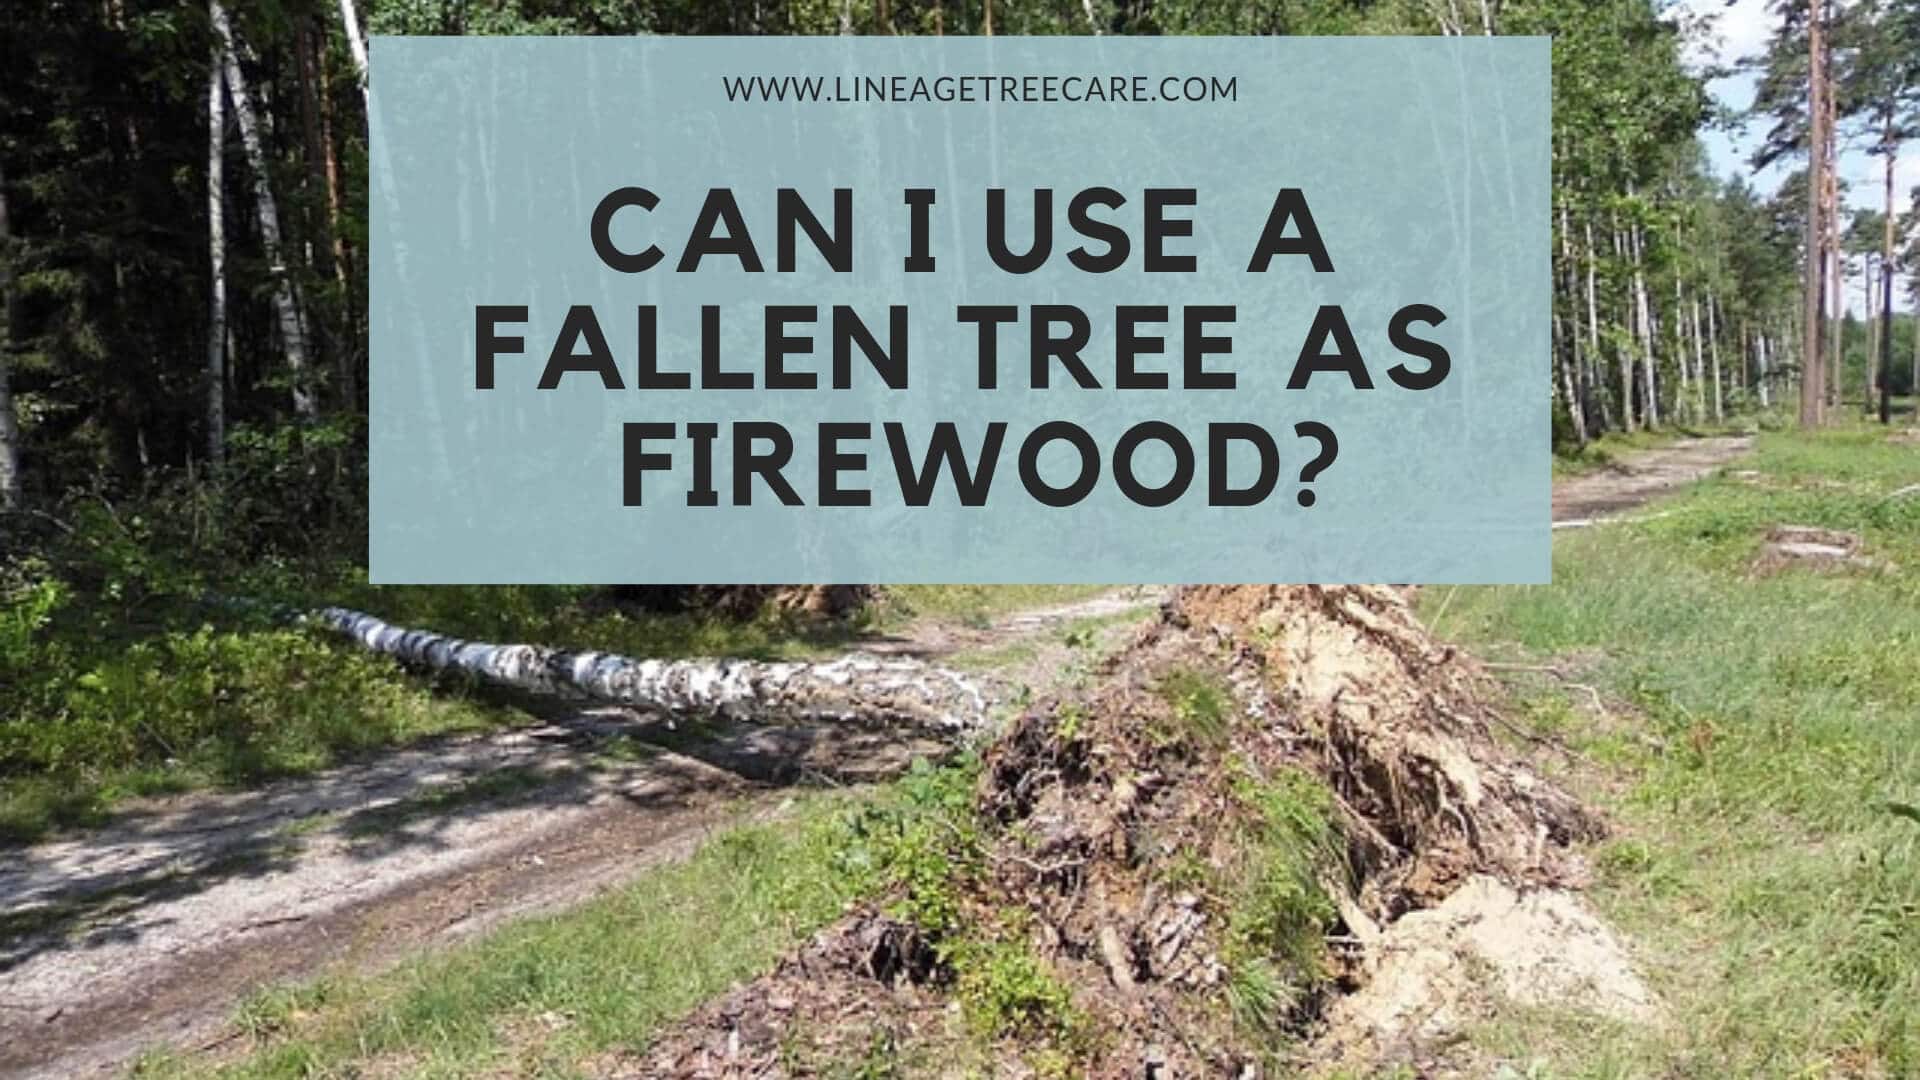 Can I Use a Fallen Tree for Firewood?